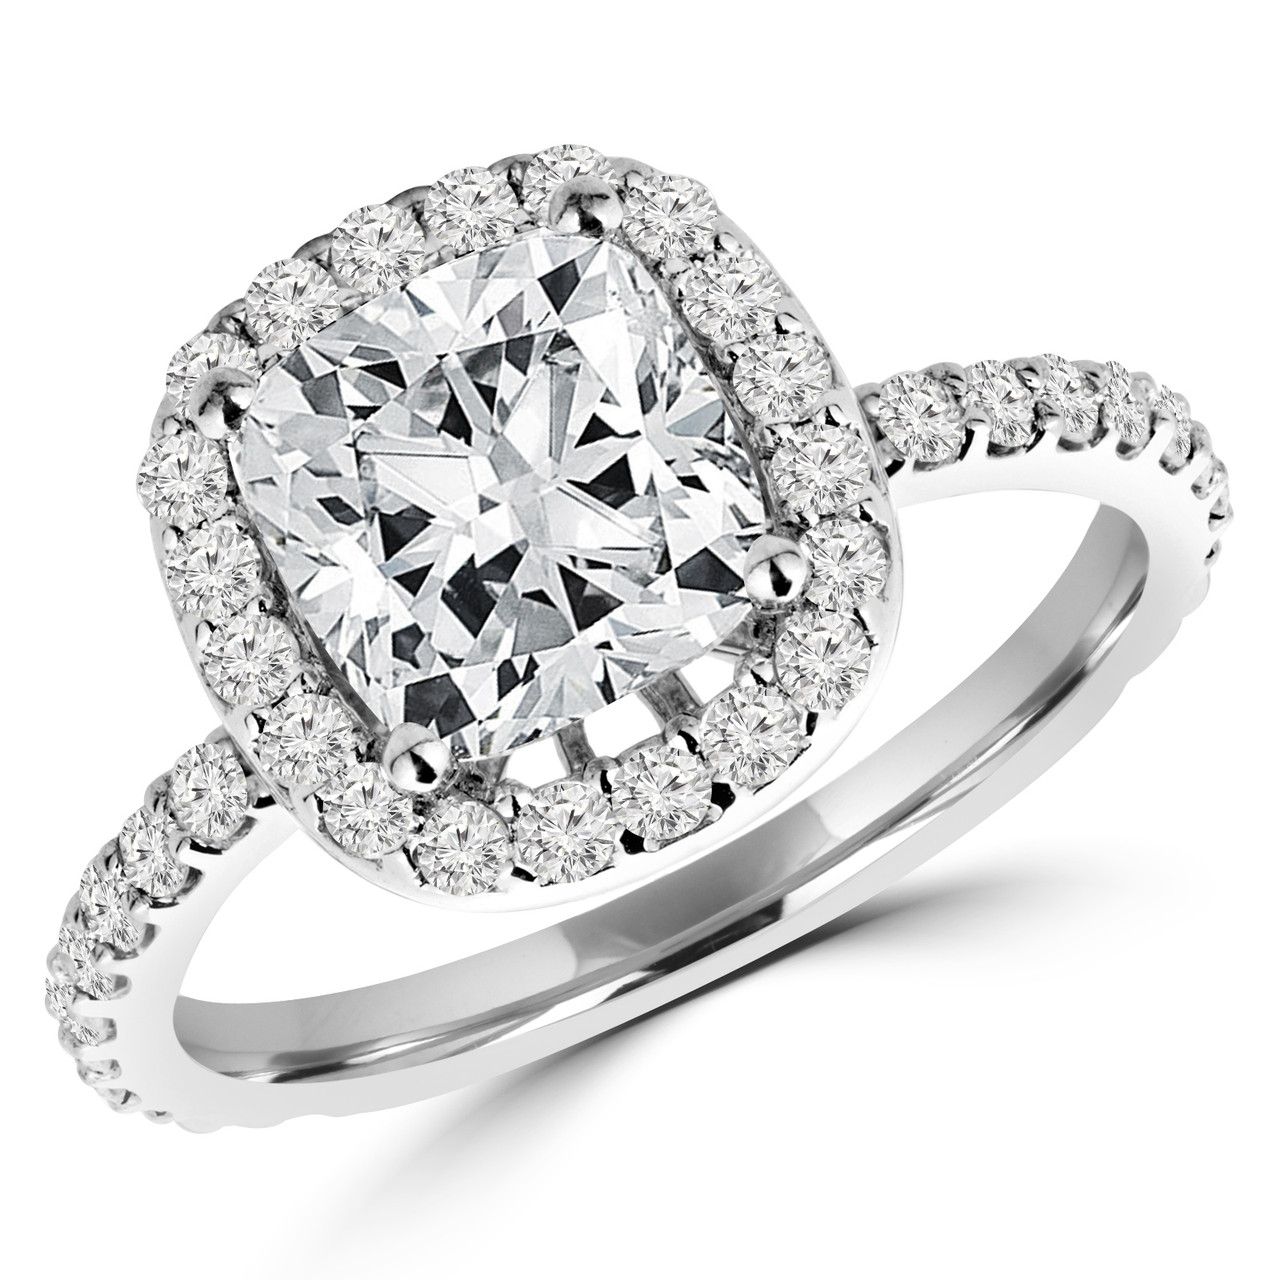 Two-Tone Cushion-Cut Diamond Ring with Halo Los Angeles | Peter Norman